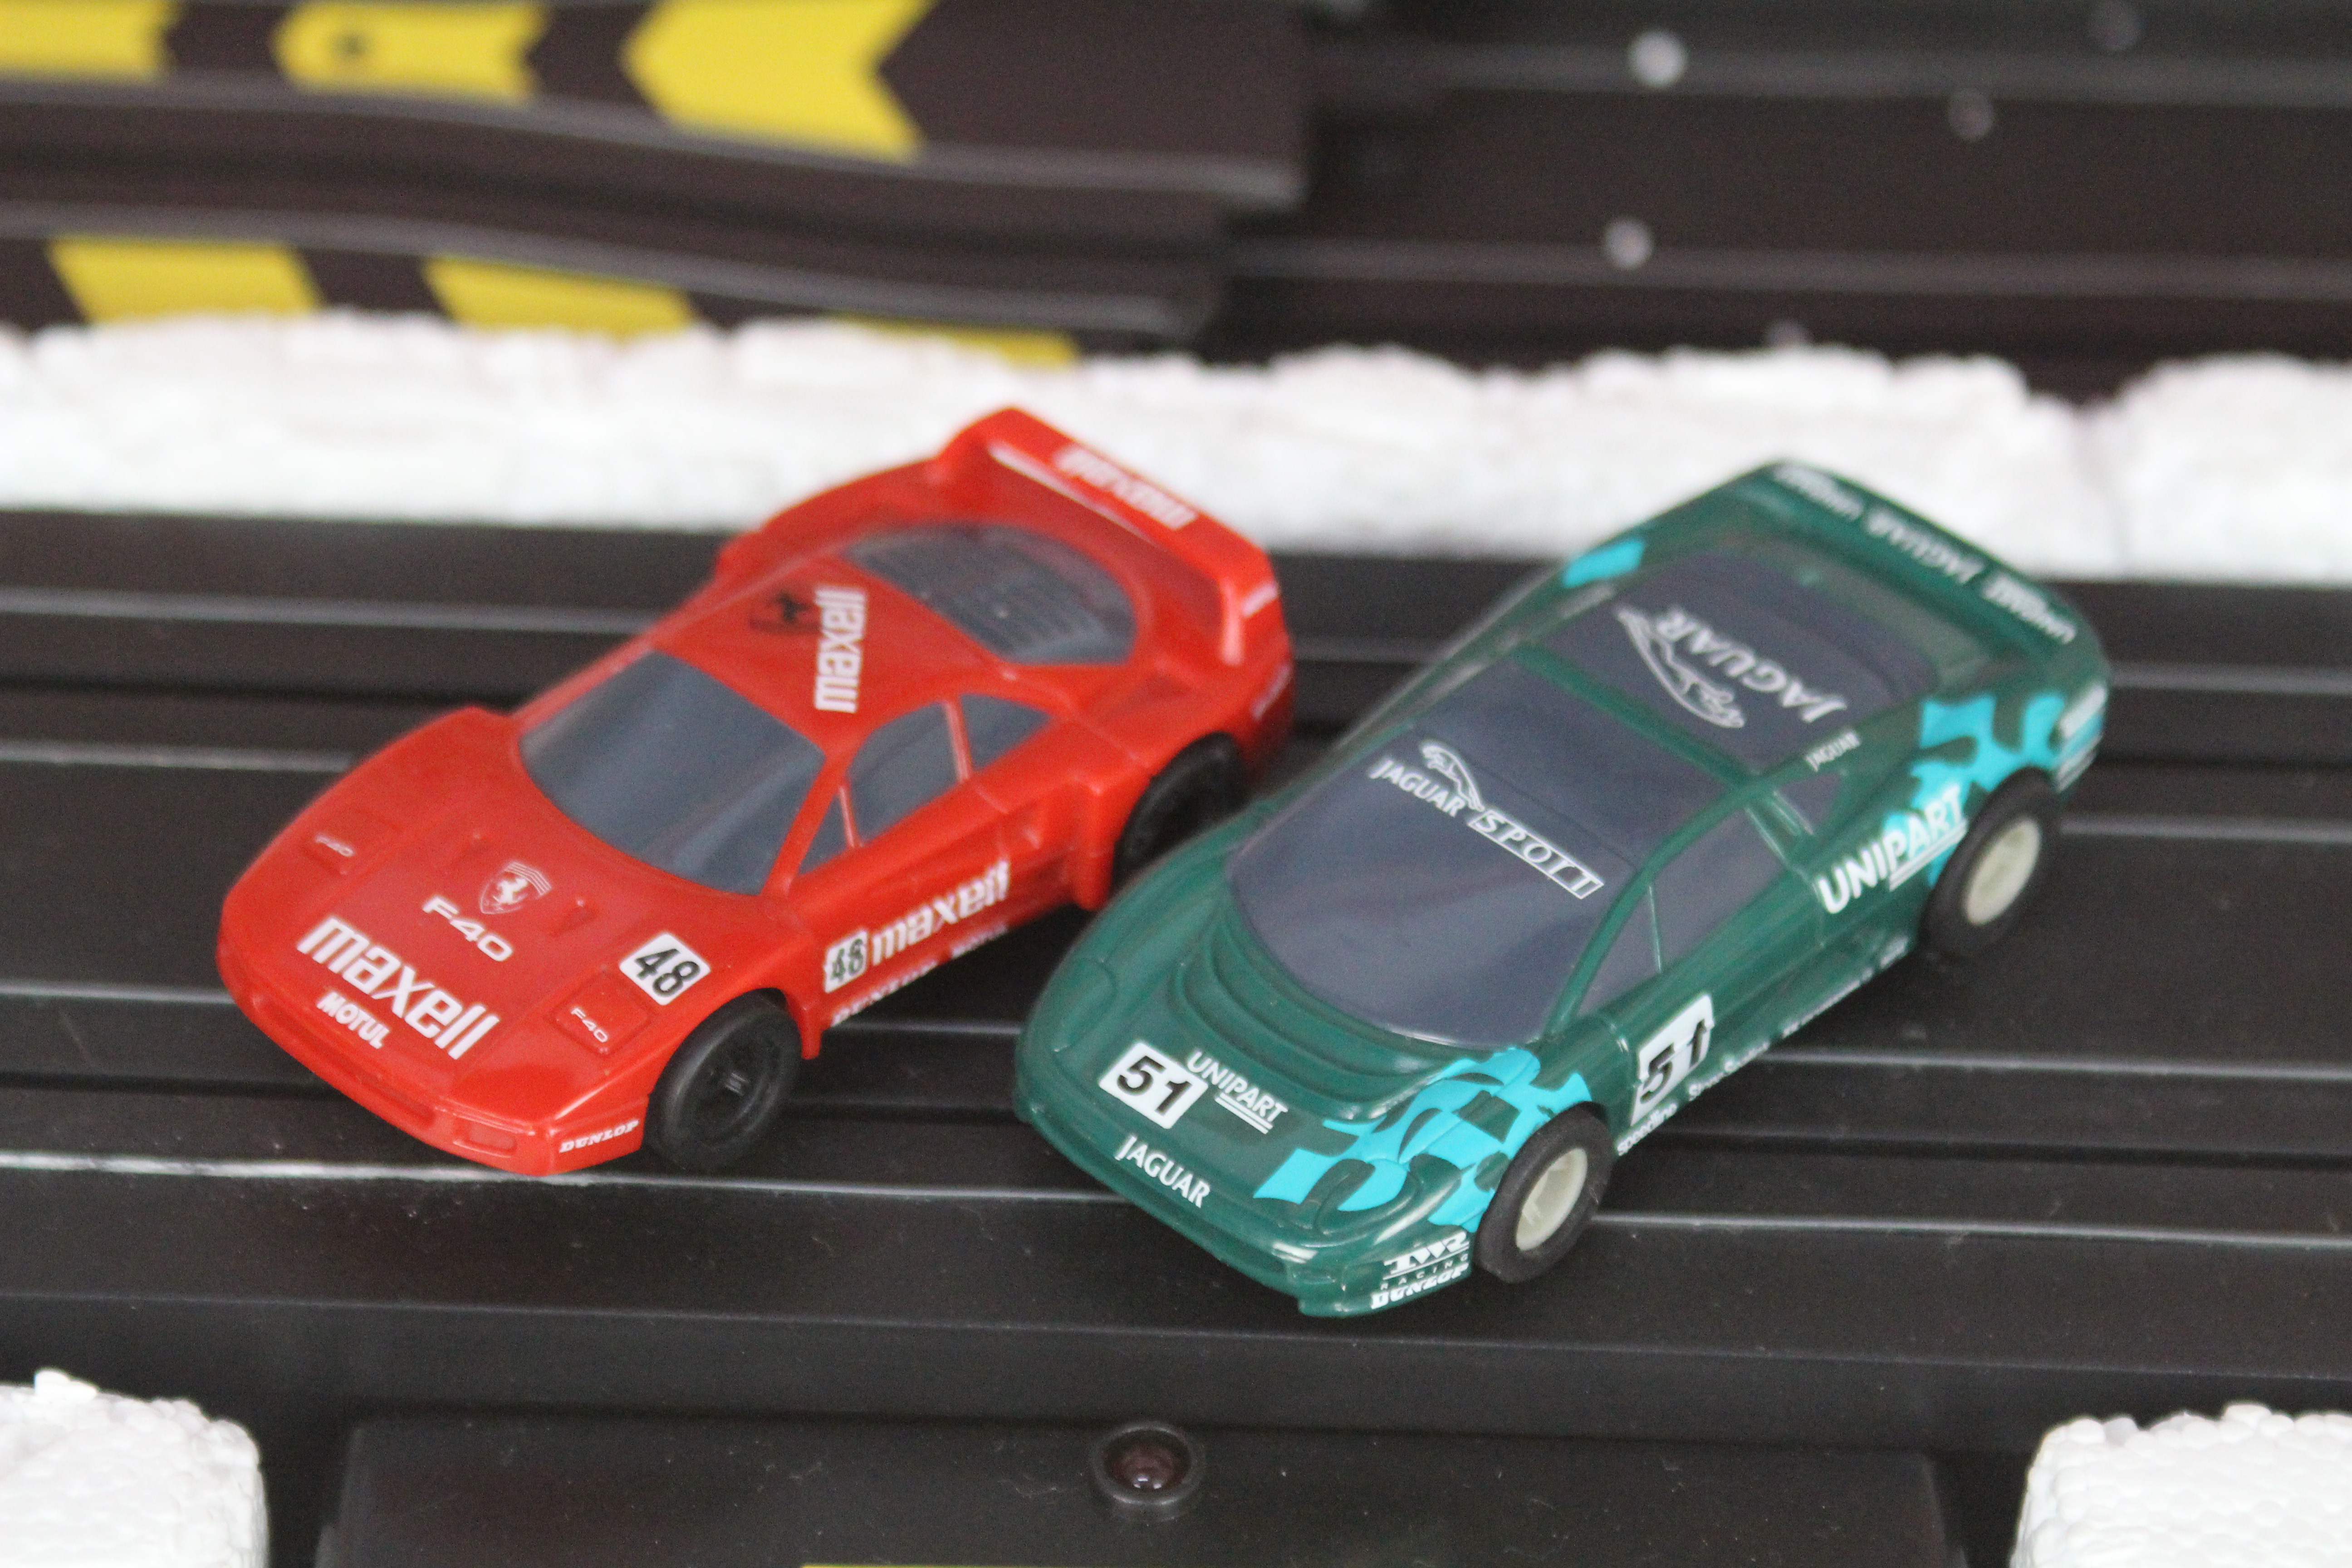 Scalextric - 2 x boxed # G090 Micro Scalextric Super Endurance sets in 1:64 scale. - Image 3 of 4